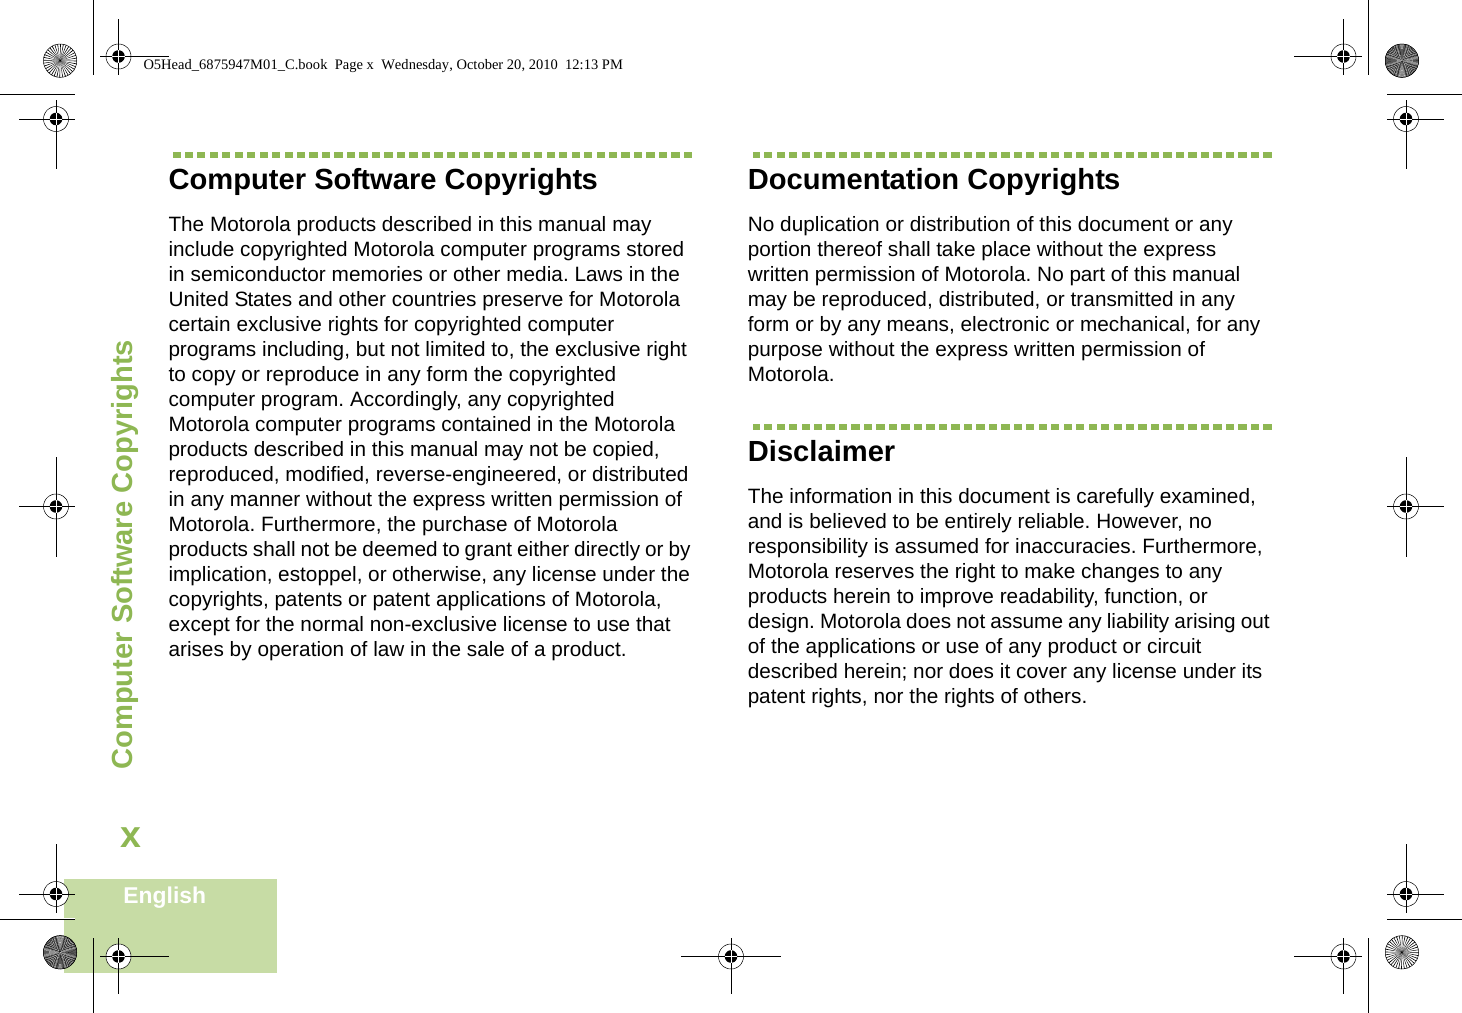 Computer Software CopyrightsEnglishxComputer Software CopyrightsThe Motorola products described in this manual may include copyrighted Motorola computer programs stored in semiconductor memories or other media. Laws in the United States and other countries preserve for Motorola certain exclusive rights for copyrighted computer programs including, but not limited to, the exclusive right to copy or reproduce in any form the copyrighted computer program. Accordingly, any copyrighted Motorola computer programs contained in the Motorola products described in this manual may not be copied, reproduced, modified, reverse-engineered, or distributed in any manner without the express written permission of Motorola. Furthermore, the purchase of Motorola products shall not be deemed to grant either directly or by implication, estoppel, or otherwise, any license under the copyrights, patents or patent applications of Motorola, except for the normal non-exclusive license to use that arises by operation of law in the sale of a product.Documentation CopyrightsNo duplication or distribution of this document or any portion thereof shall take place without the express written permission of Motorola. No part of this manual may be reproduced, distributed, or transmitted in any form or by any means, electronic or mechanical, for any purpose without the express written permission of Motorola.DisclaimerThe information in this document is carefully examined, and is believed to be entirely reliable. However, no responsibility is assumed for inaccuracies. Furthermore, Motorola reserves the right to make changes to any products herein to improve readability, function, or design. Motorola does not assume any liability arising out of the applications or use of any product or circuit described herein; nor does it cover any license under its patent rights, nor the rights of others. O5Head_6875947M01_C.book  Page x  Wednesday, October 20, 2010  12:13 PM